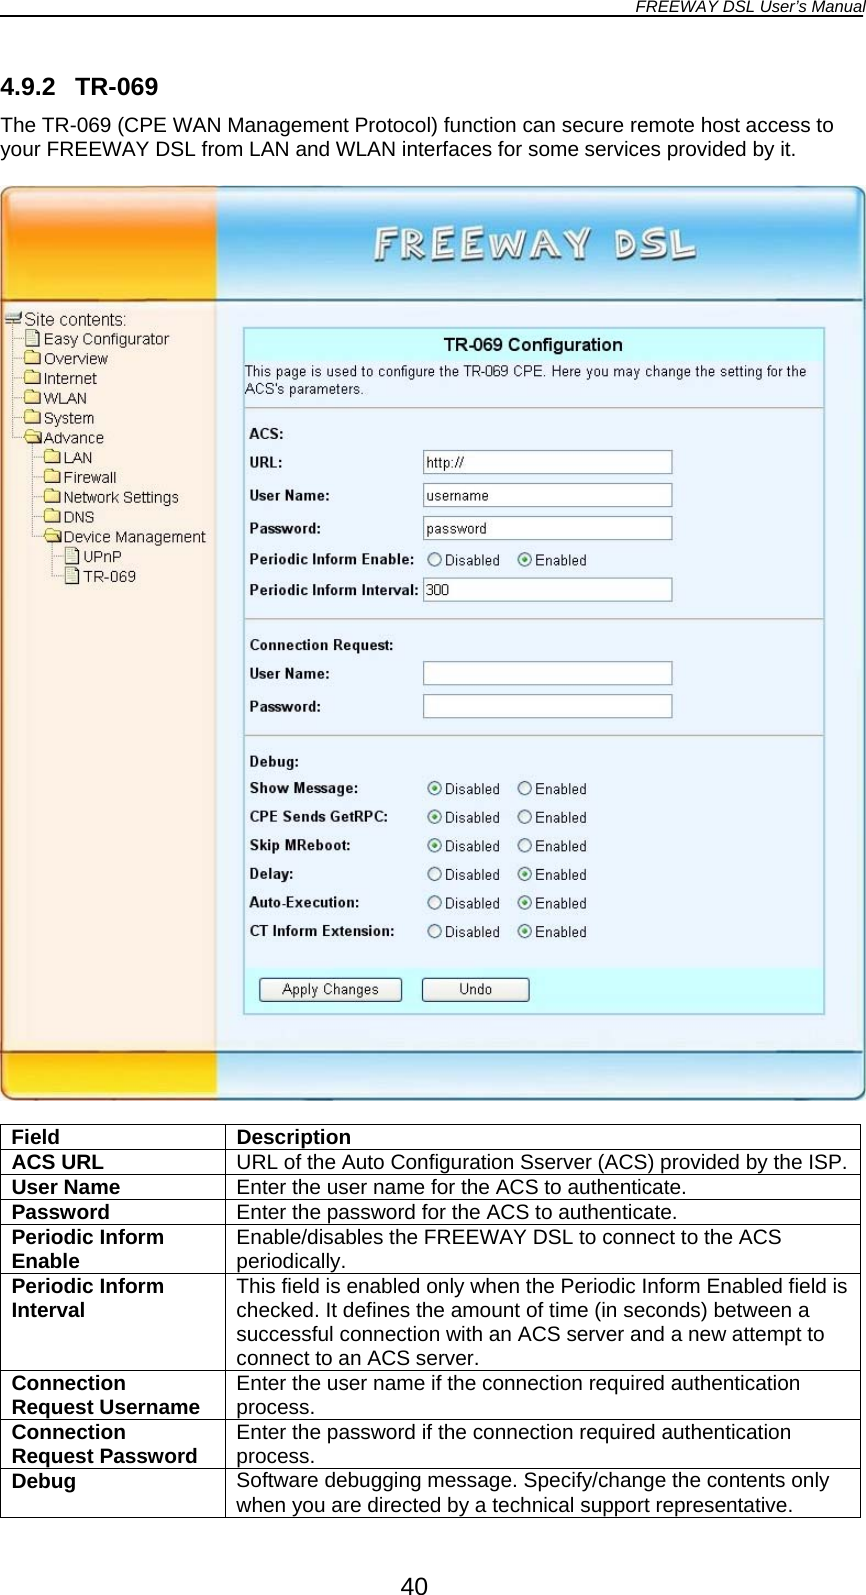 FREEWAY DSL User’s Manual  4.9.2 TR-069 The TR-069 (CPE WAN Management Protocol) function can secure remote host access to your FREEWAY DSL from LAN and WLAN interfaces for some services provided by it.    Field Description ACS URL  URL of the Auto Configuration Sserver (ACS) provided by the ISP.User Name  Enter the user name for the ACS to authenticate. Password  Enter the password for the ACS to authenticate. Periodic Inform Enable  Enable/disables the FREEWAY DSL to connect to the ACS periodically. Periodic Inform Interval  This field is enabled only when the Periodic Inform Enabled field is checked. It defines the amount of time (in seconds) between a successful connection with an ACS server and a new attempt to connect to an ACS server. Connection Request Username  Enter the user name if the connection required authentication process. Connection Request Password  Enter the password if the connection required authentication process. Debug  Software debugging message. Specify/change the contents only when you are directed by a technical support representative. 40 